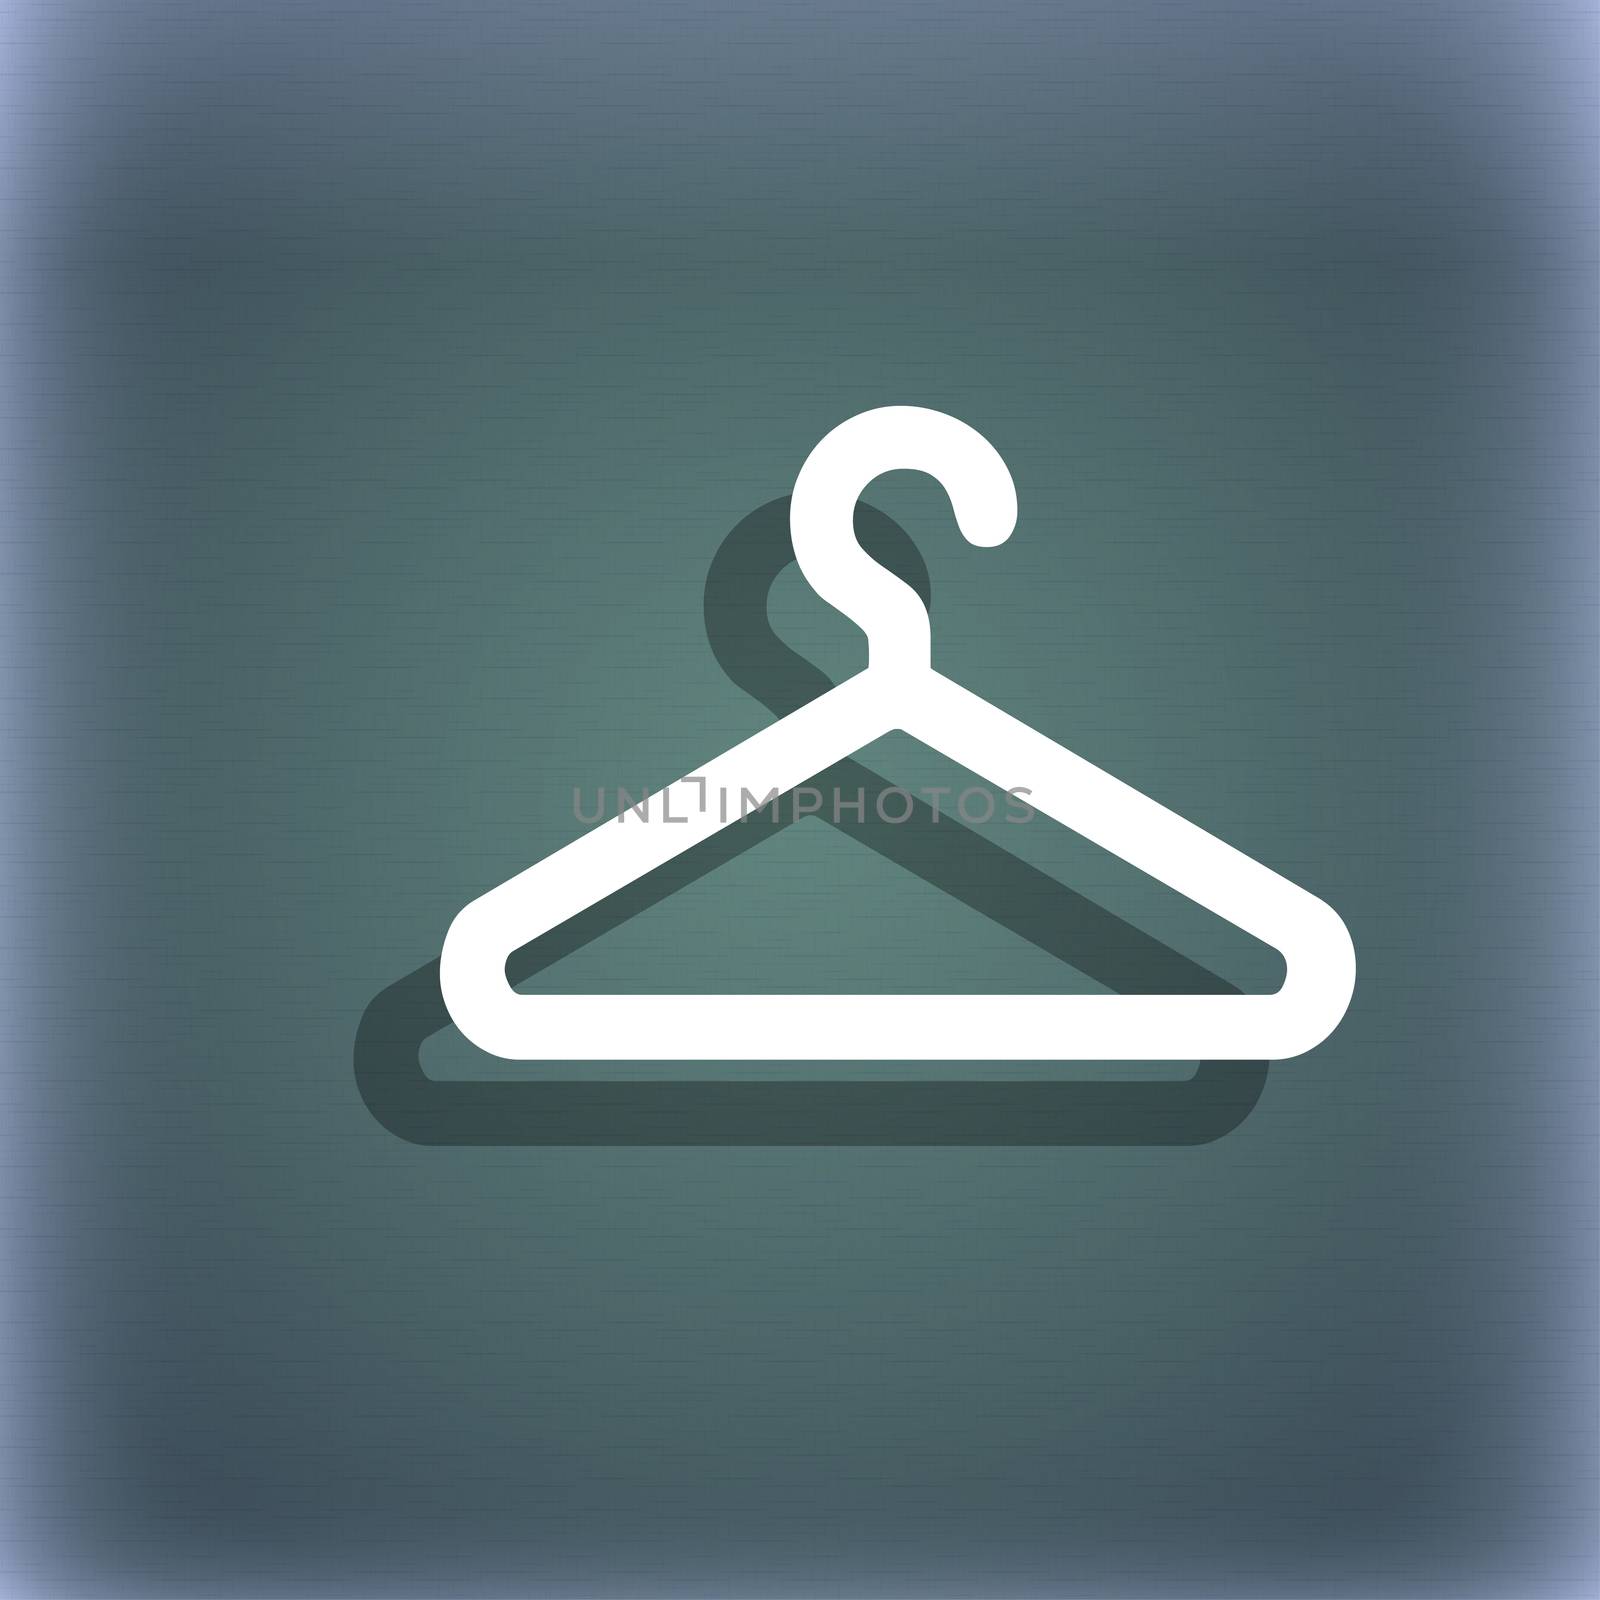 clothes hanger icon symbol on the blue-green abstract background with shadow and space for your text. illustration